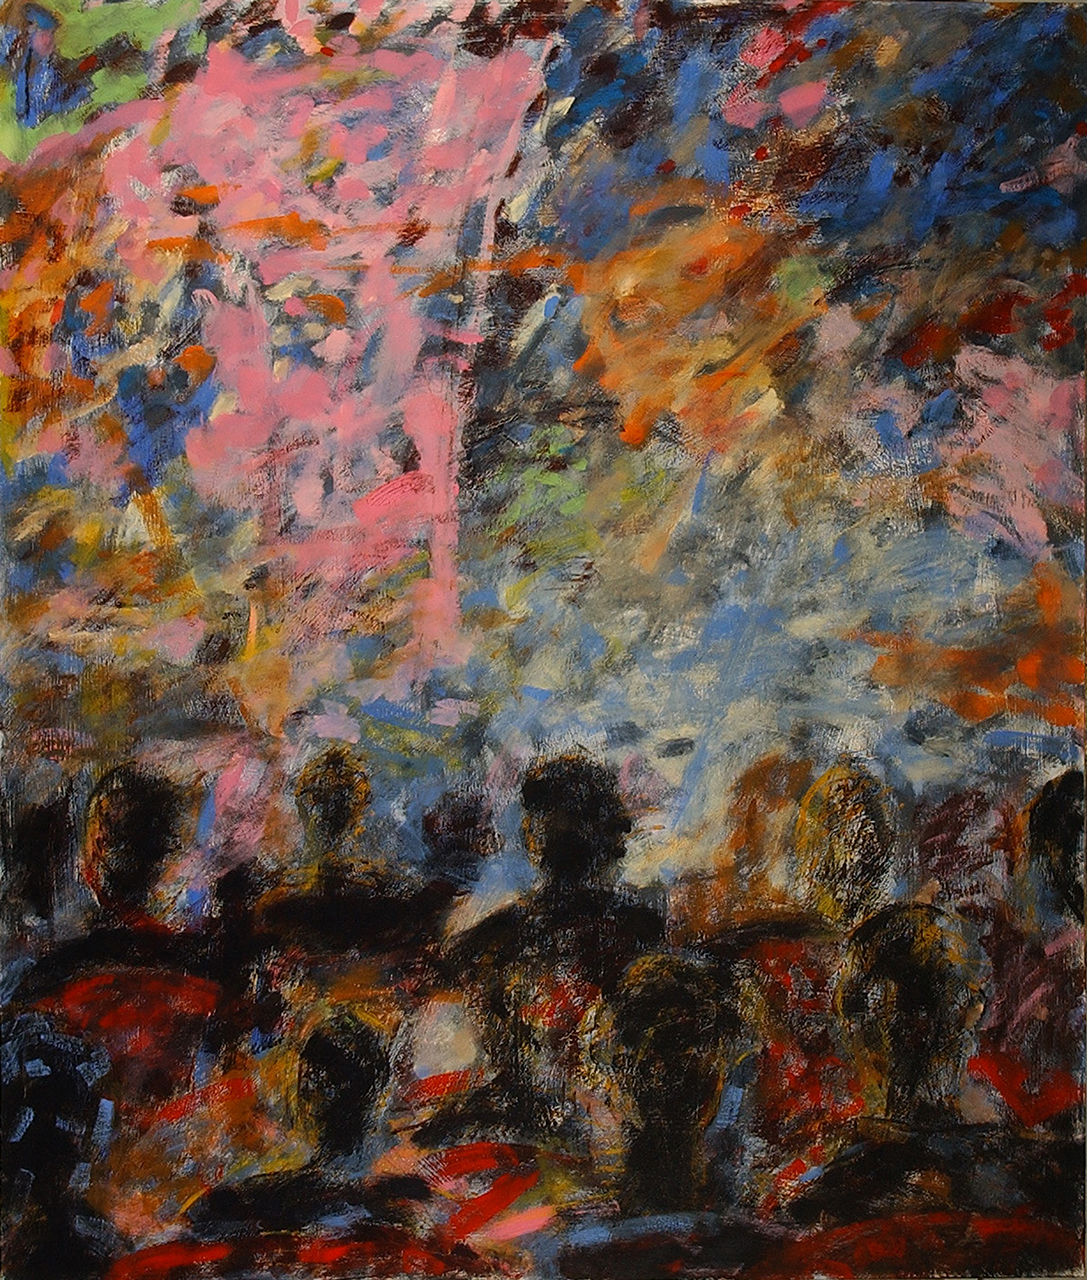 Louise-Hall-At-the-Movies-2003,-oil-on-board,-123-cm-x-141-cm-web